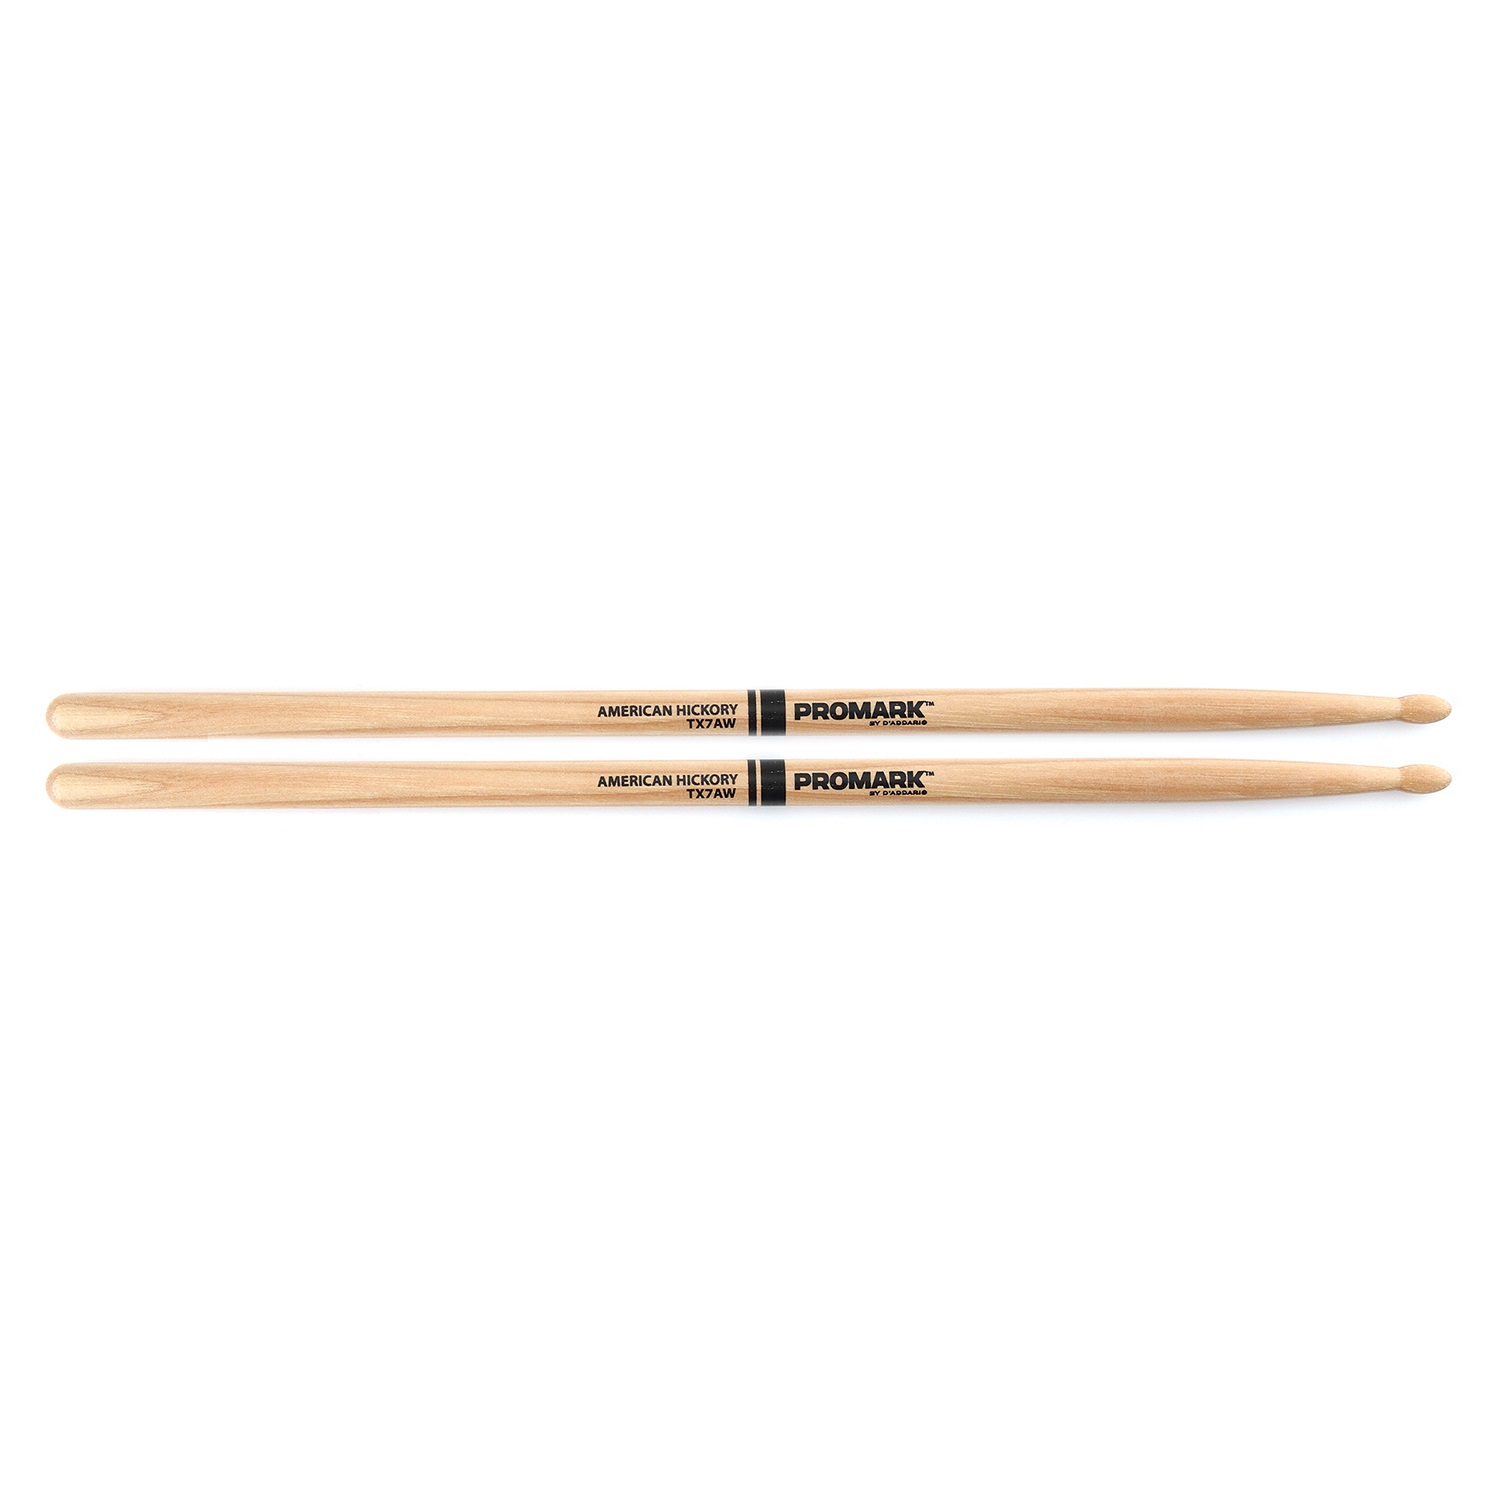 An image of Promark Hickory 7A Wood Tip Drumstick Pair - Gift for a Drummer | PMT Online